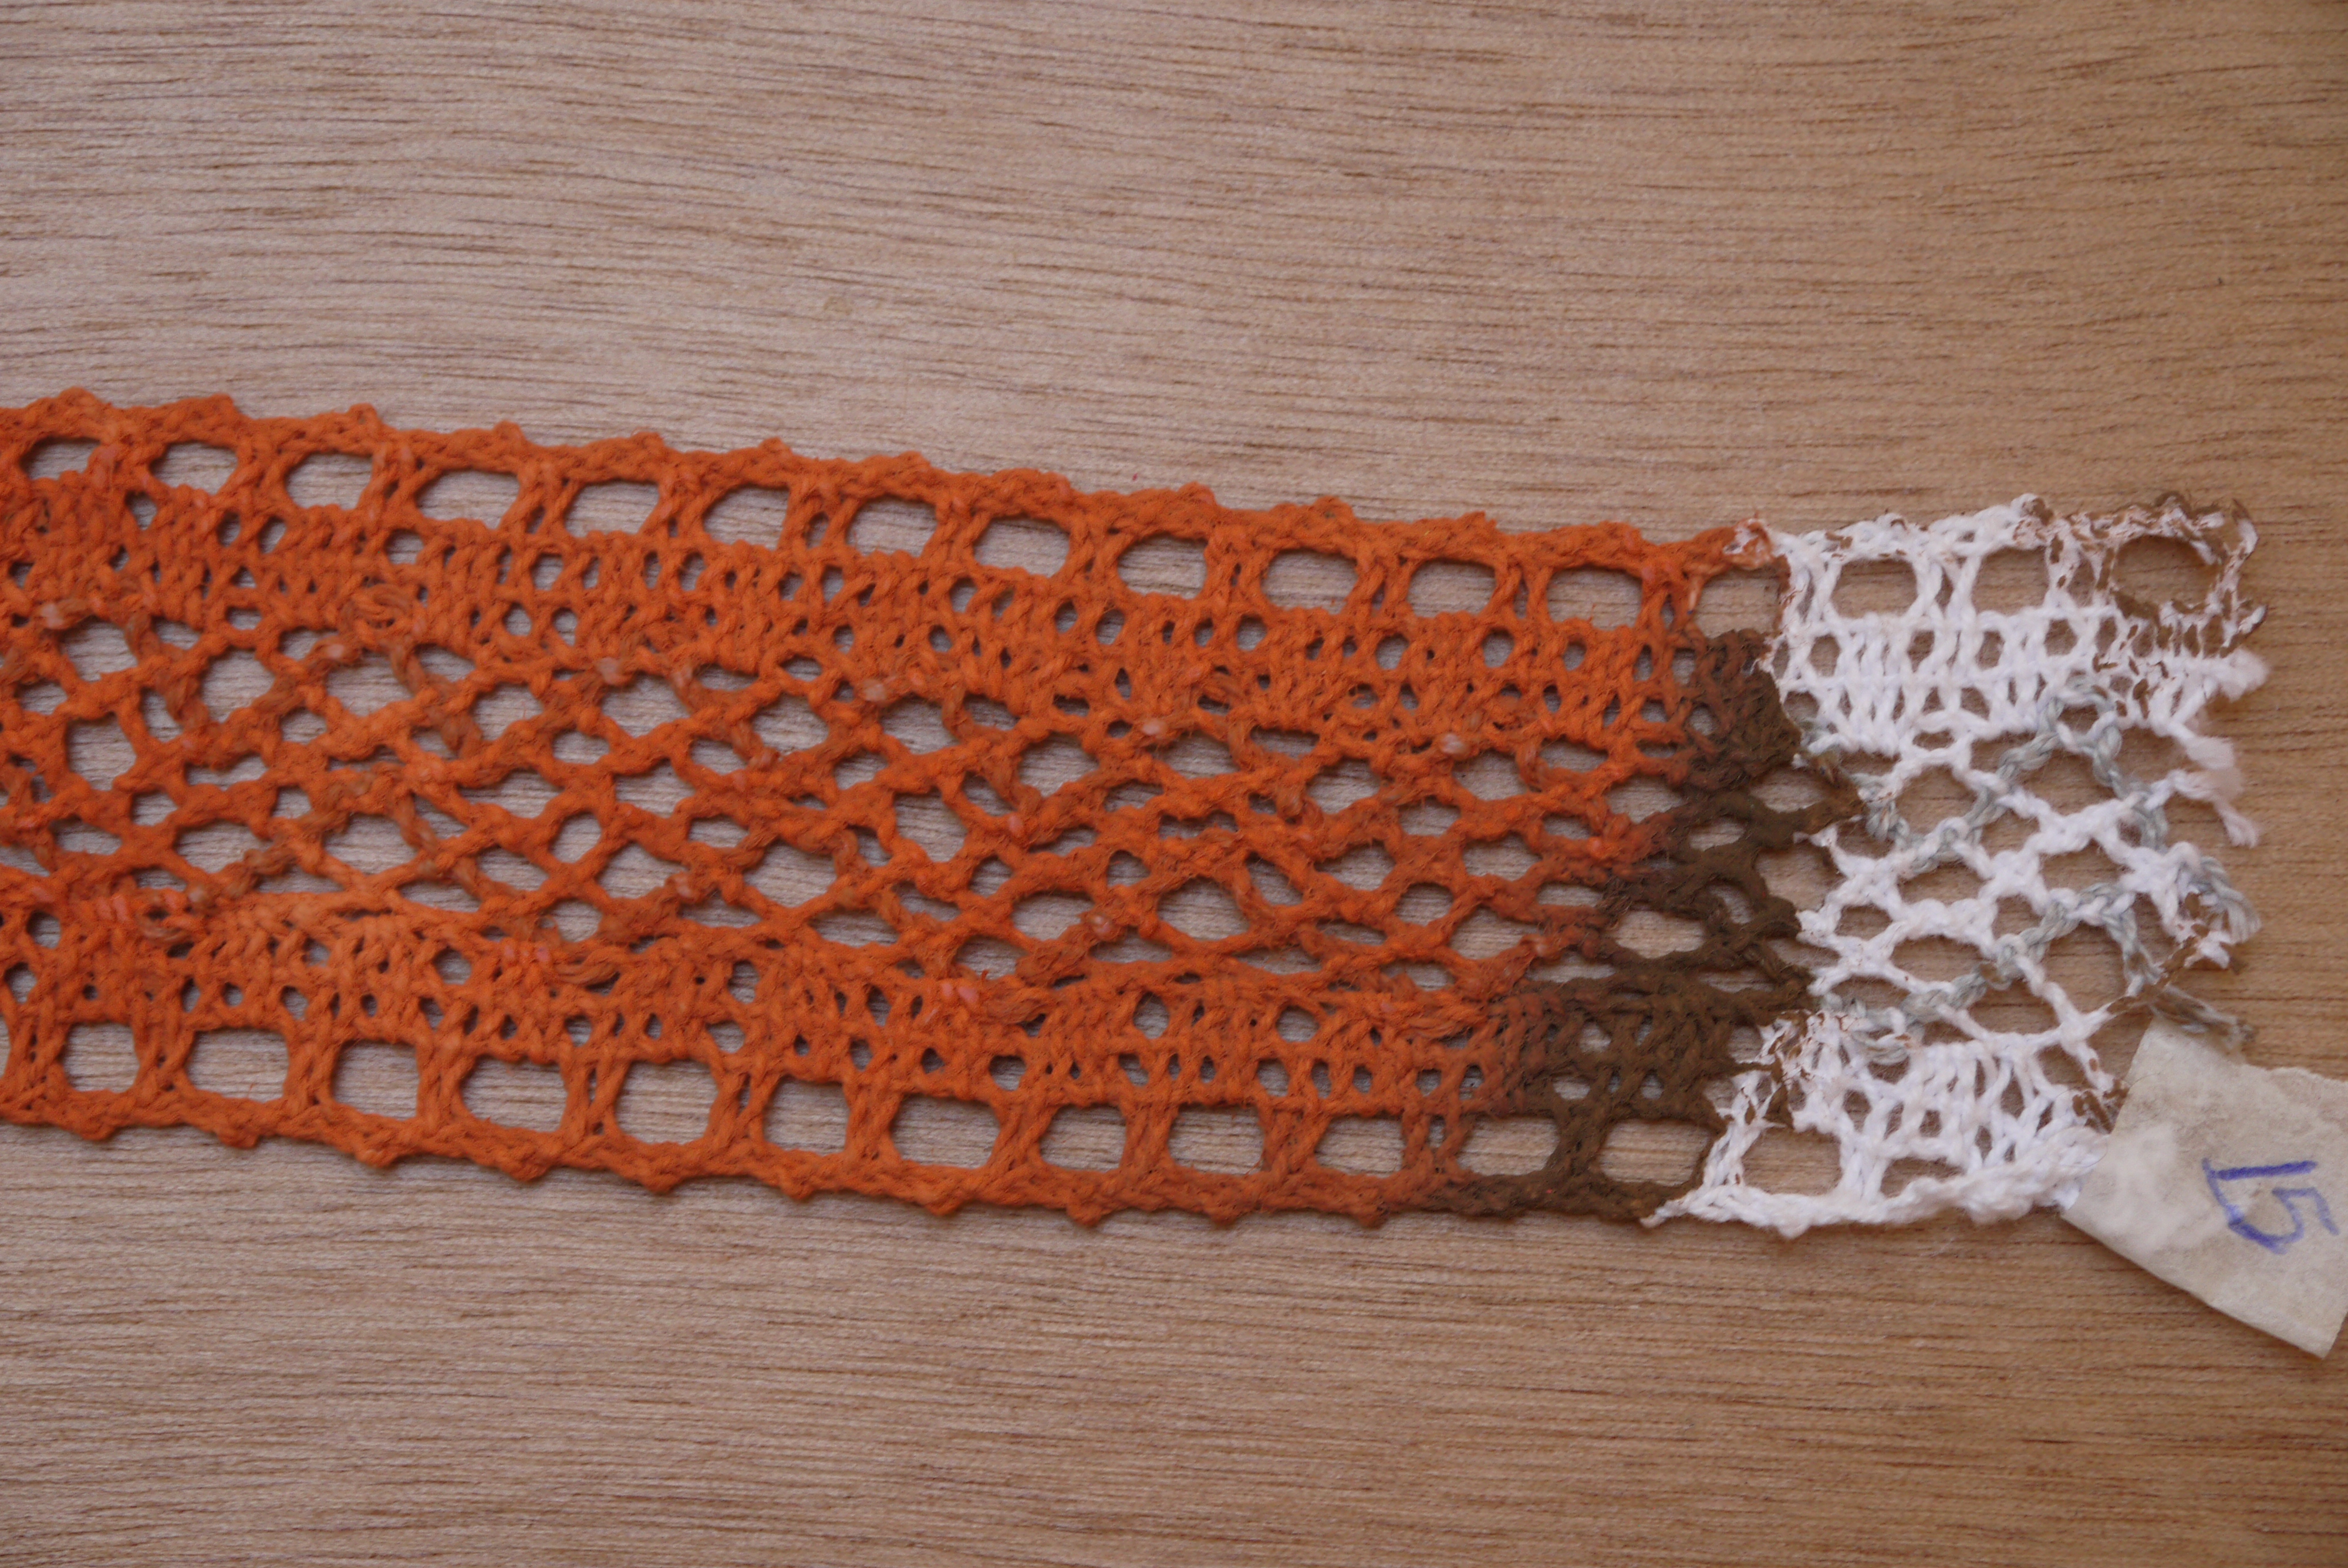 Developing Butterfly Lace